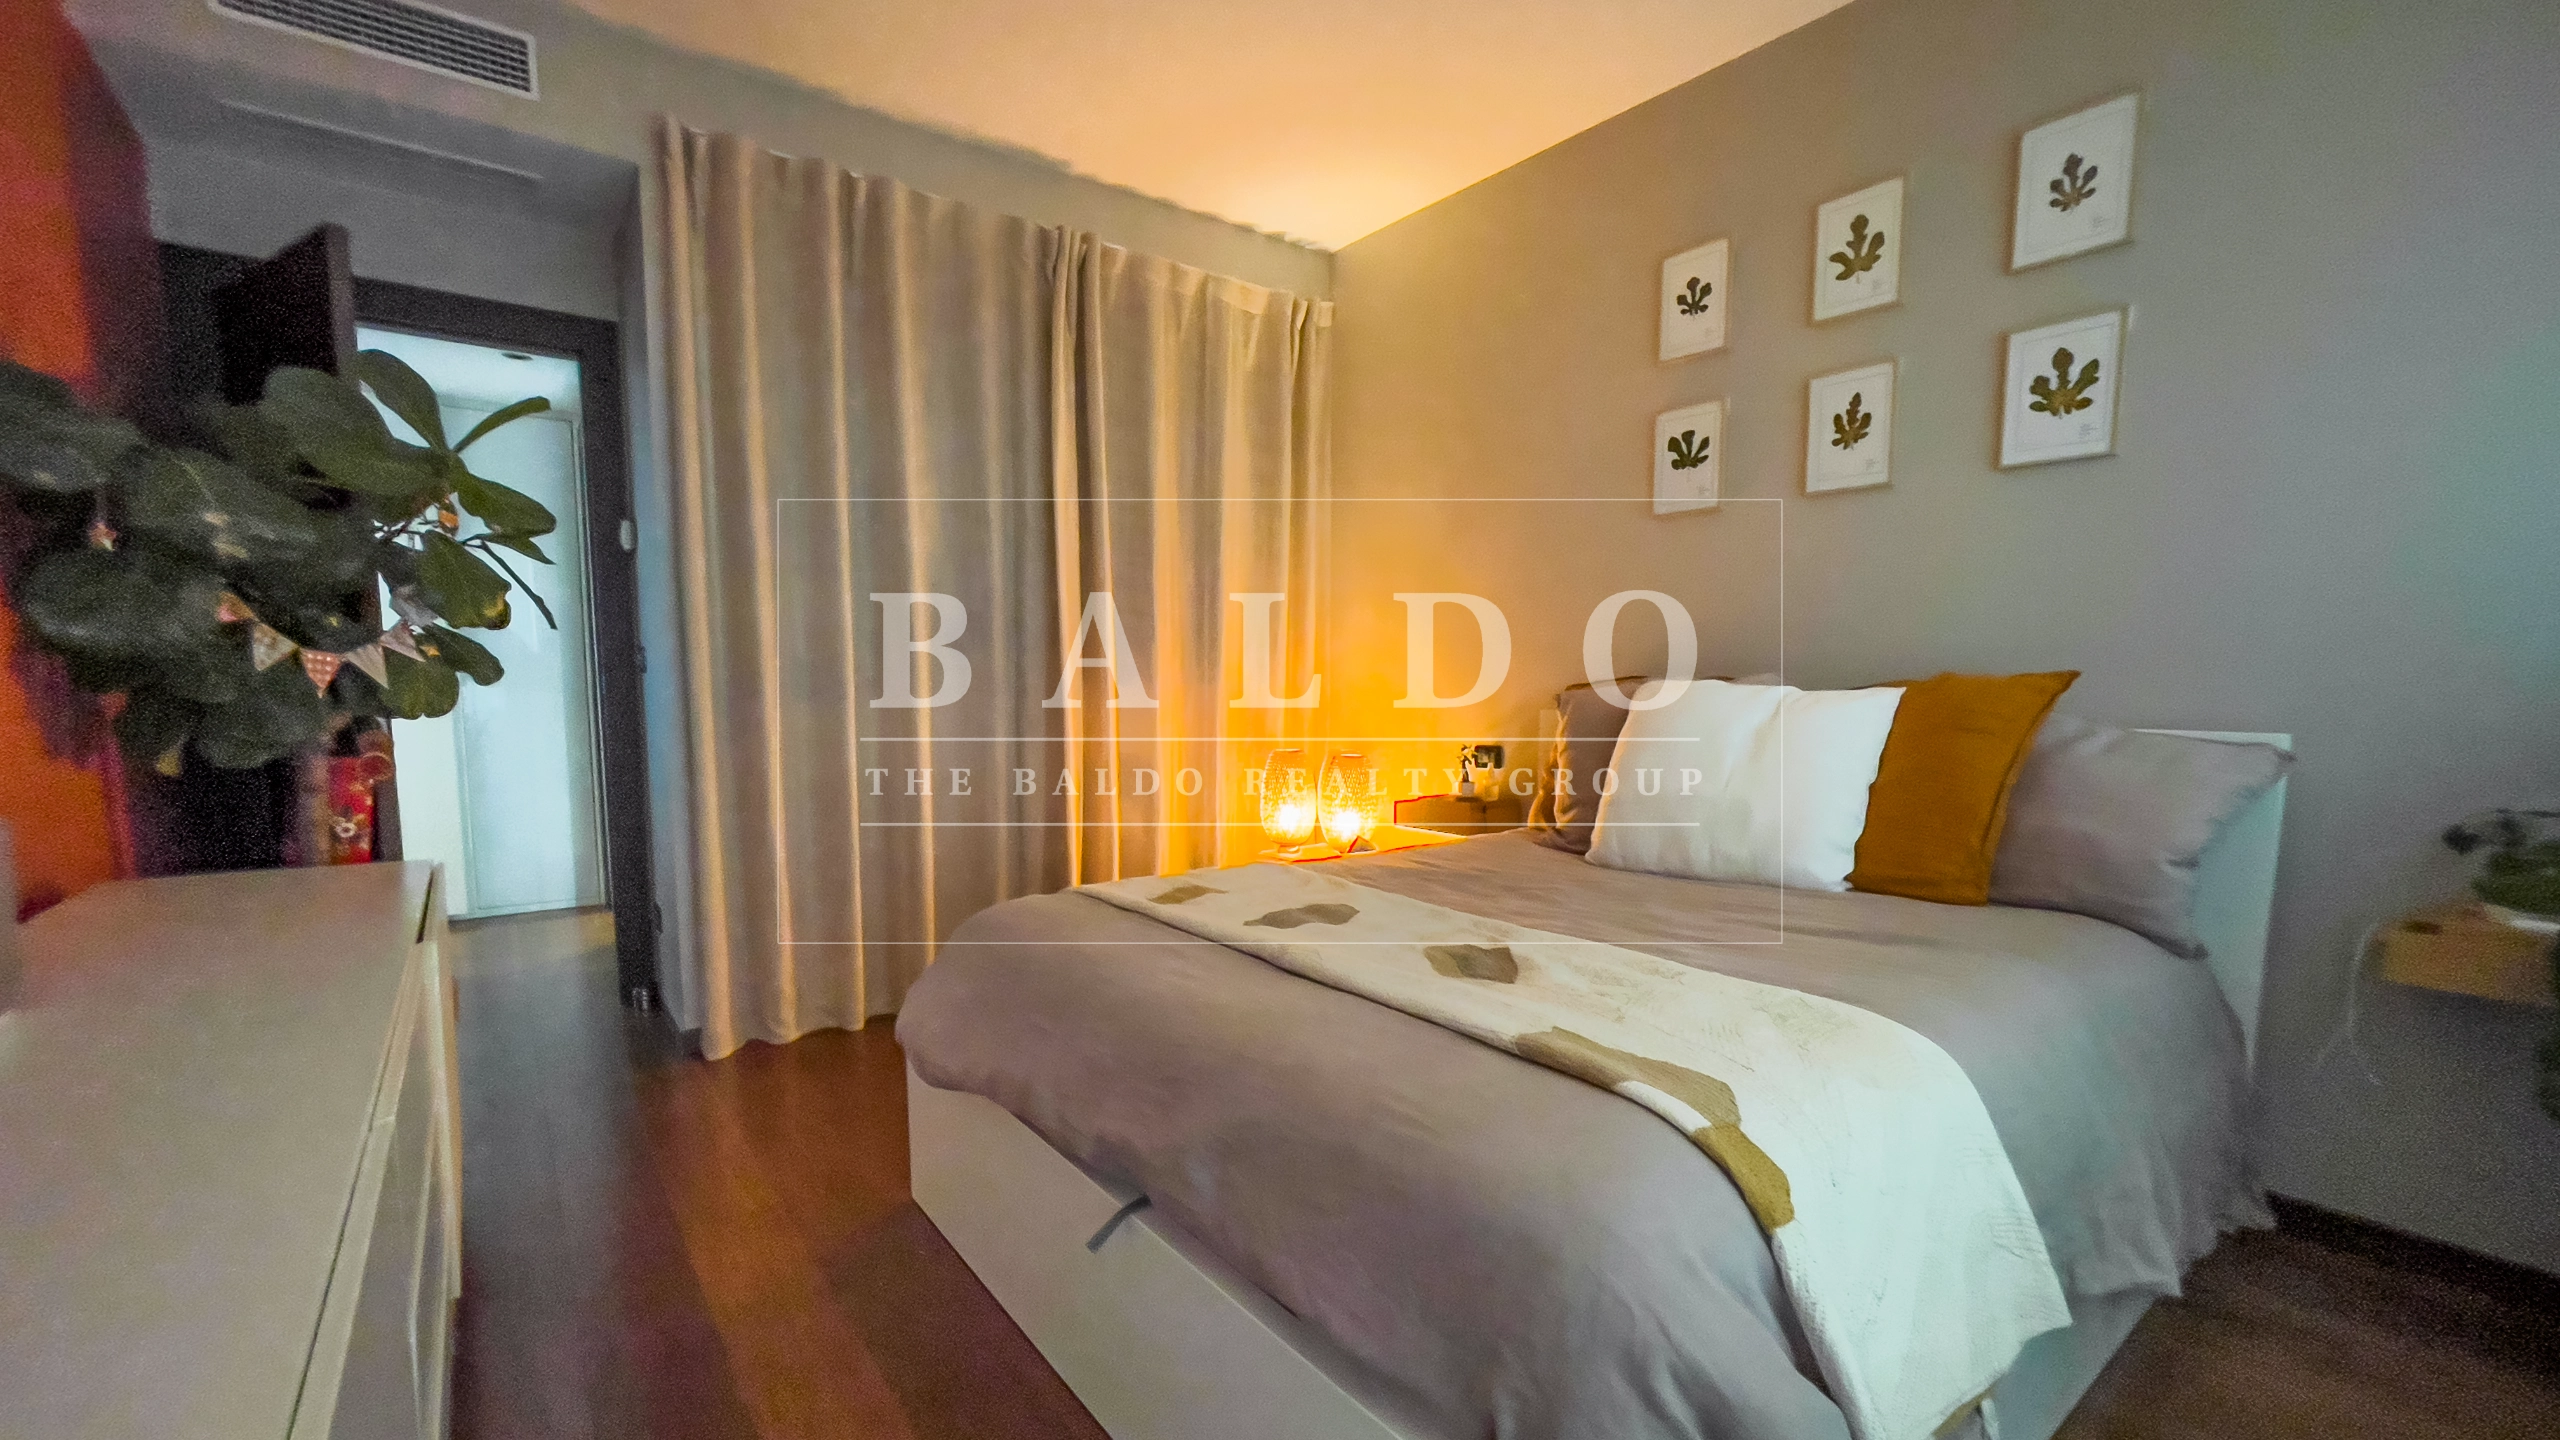 BEAUTIFUL ONE BEDROOM IN LE MIRABEAU - Photo 1